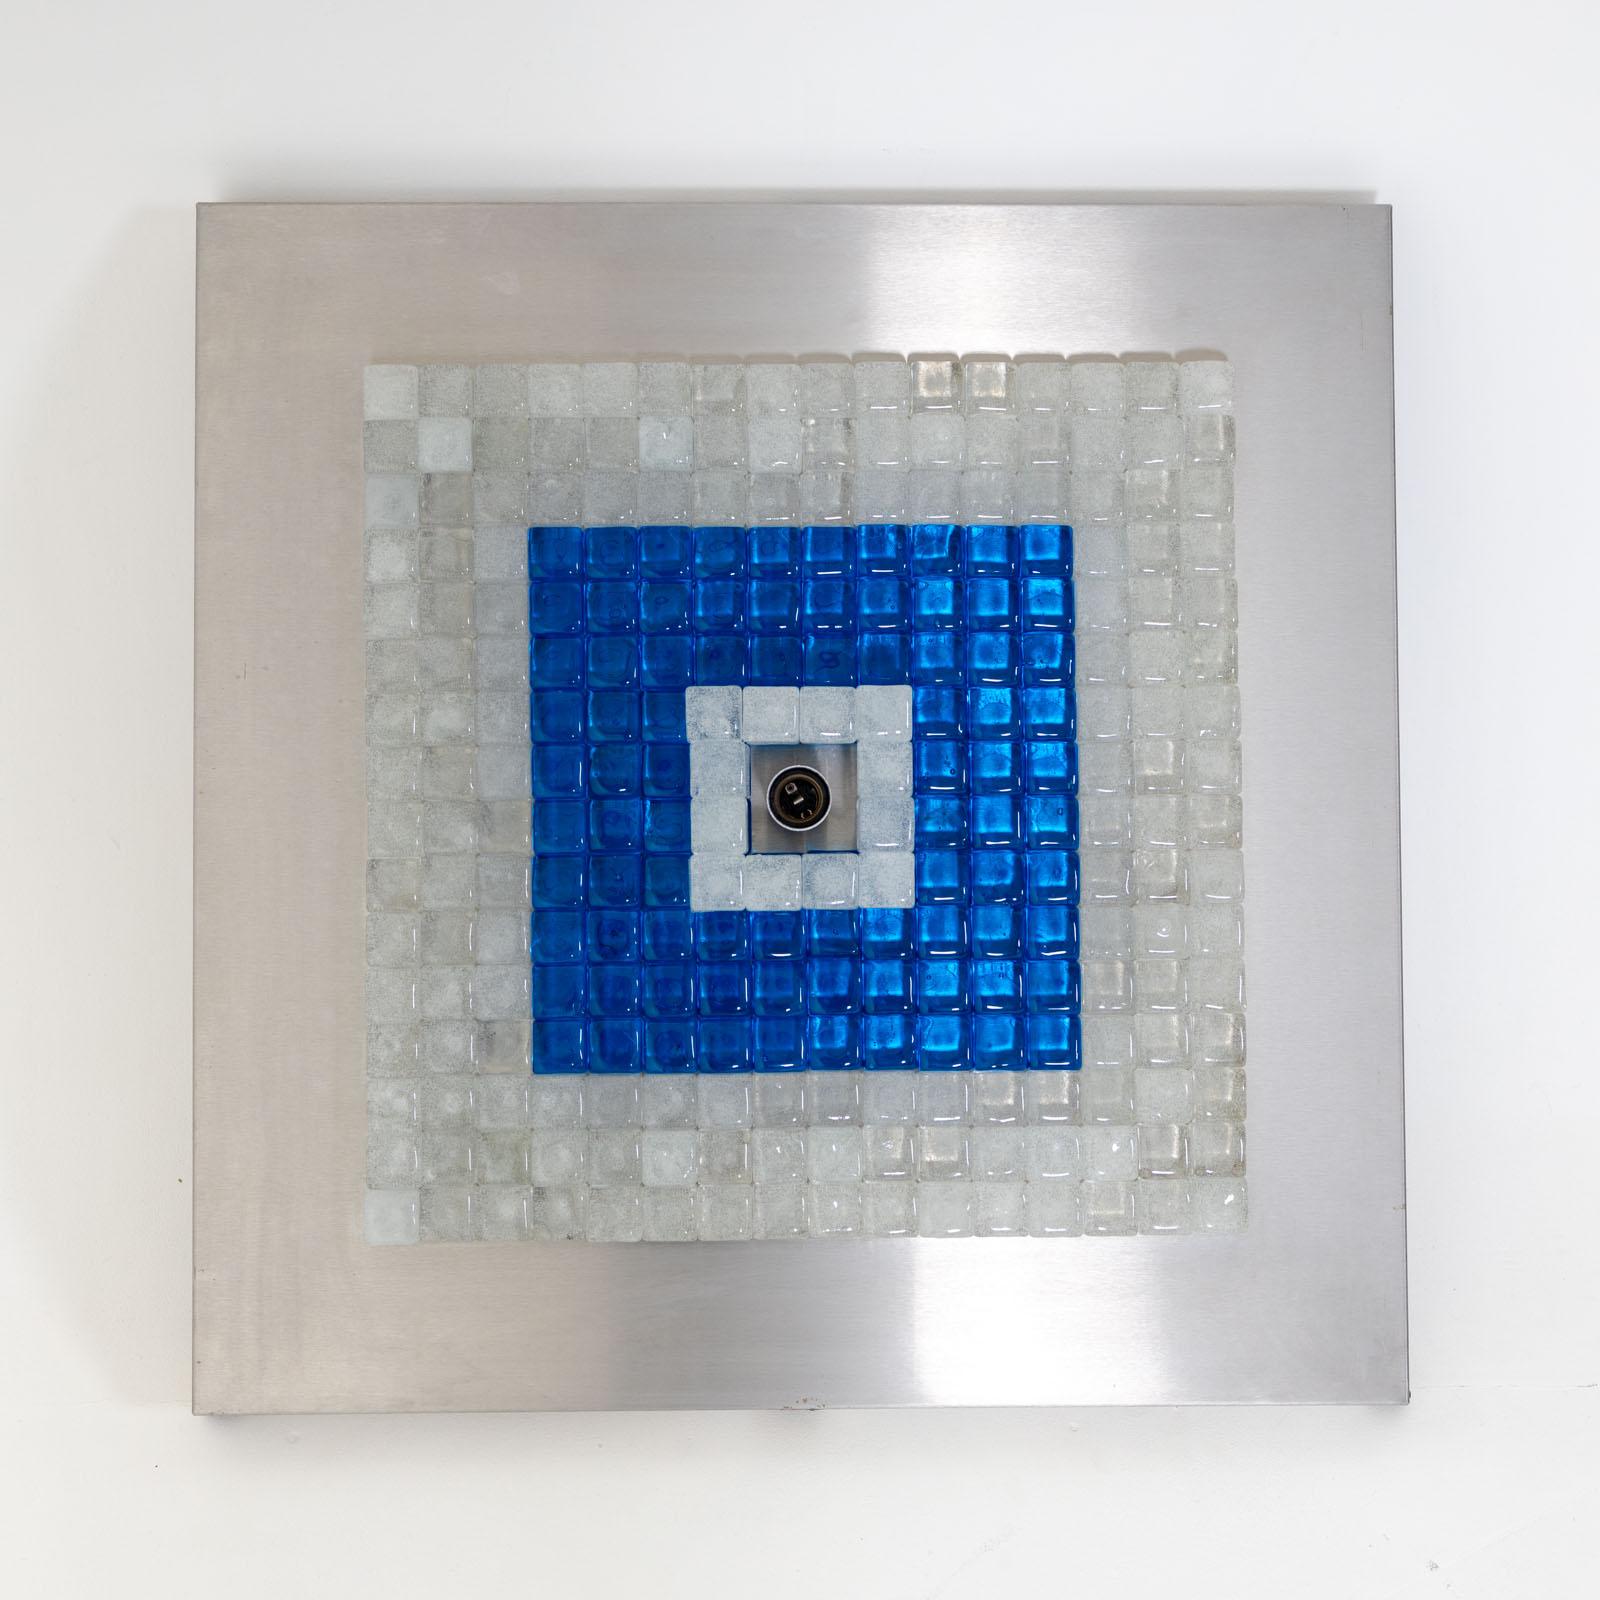 Square ceiling or wall lamp designed by Albano Poli for Poliarte in the 1970s. The lamp consists of a metal frame with smaller squares of blue and clear glass grouped around a central socket.